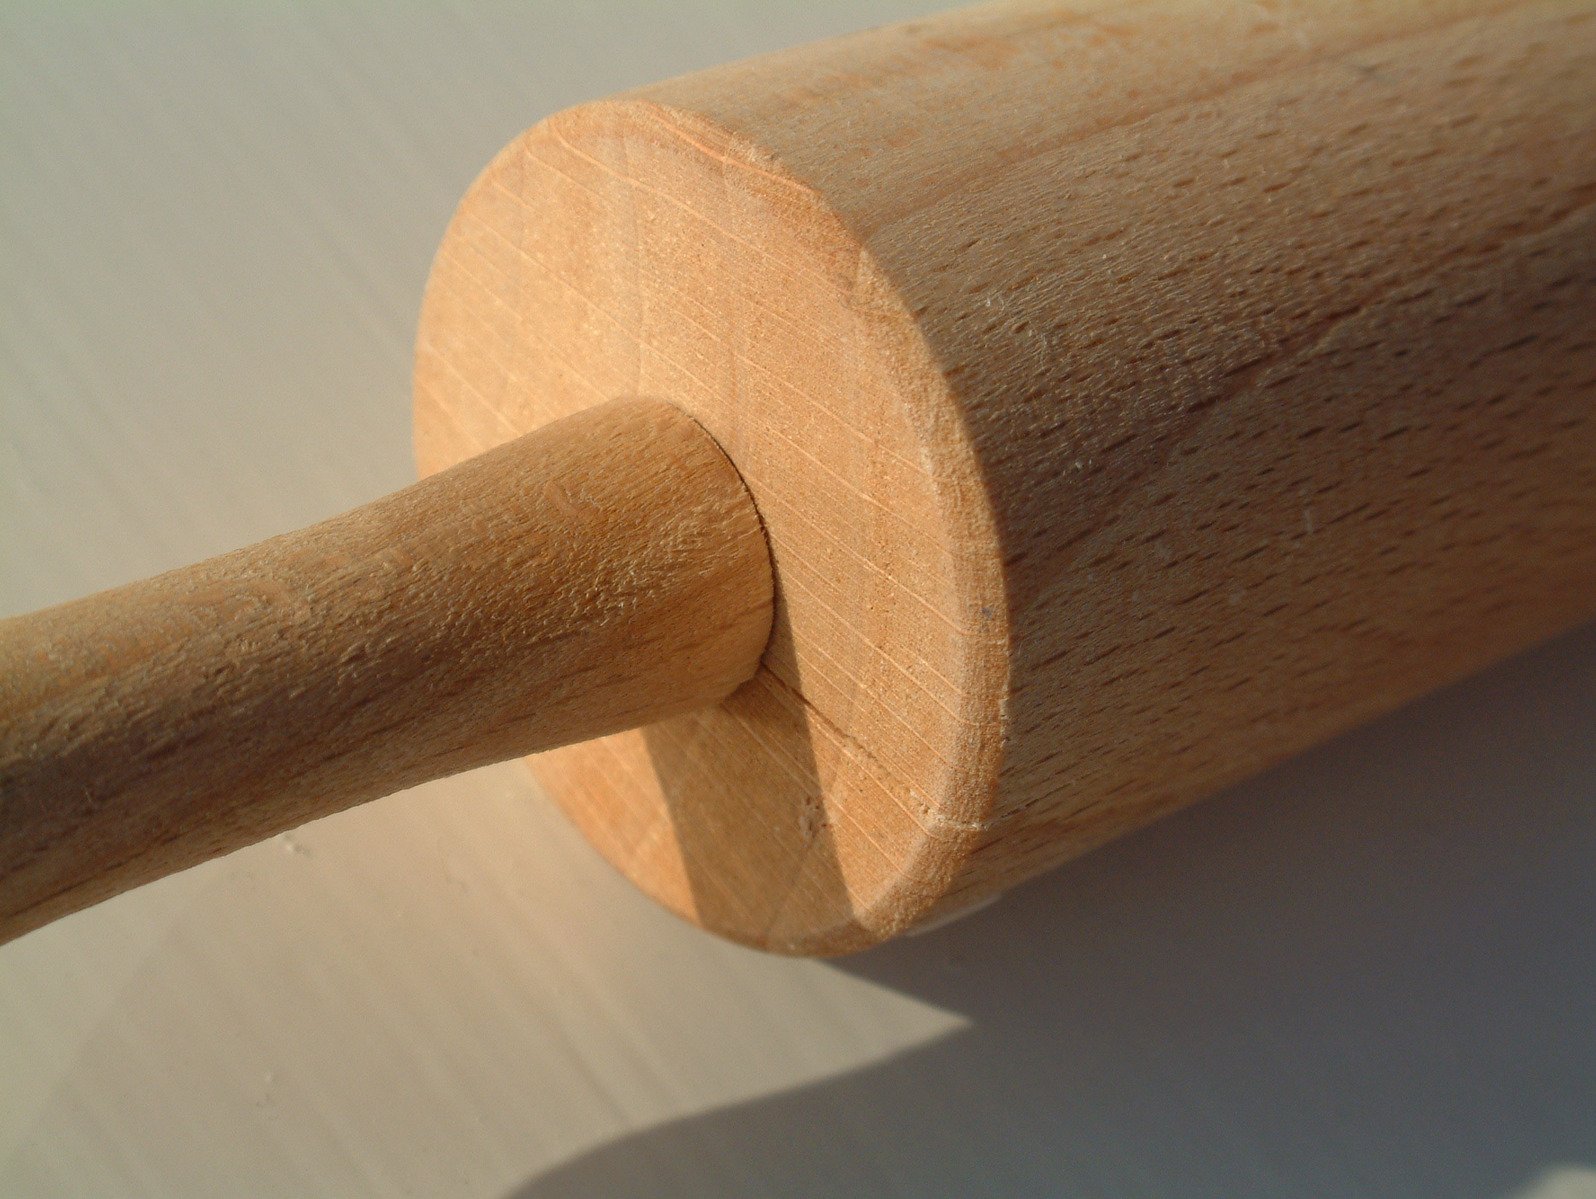 close up image of wooden object with a ring on it